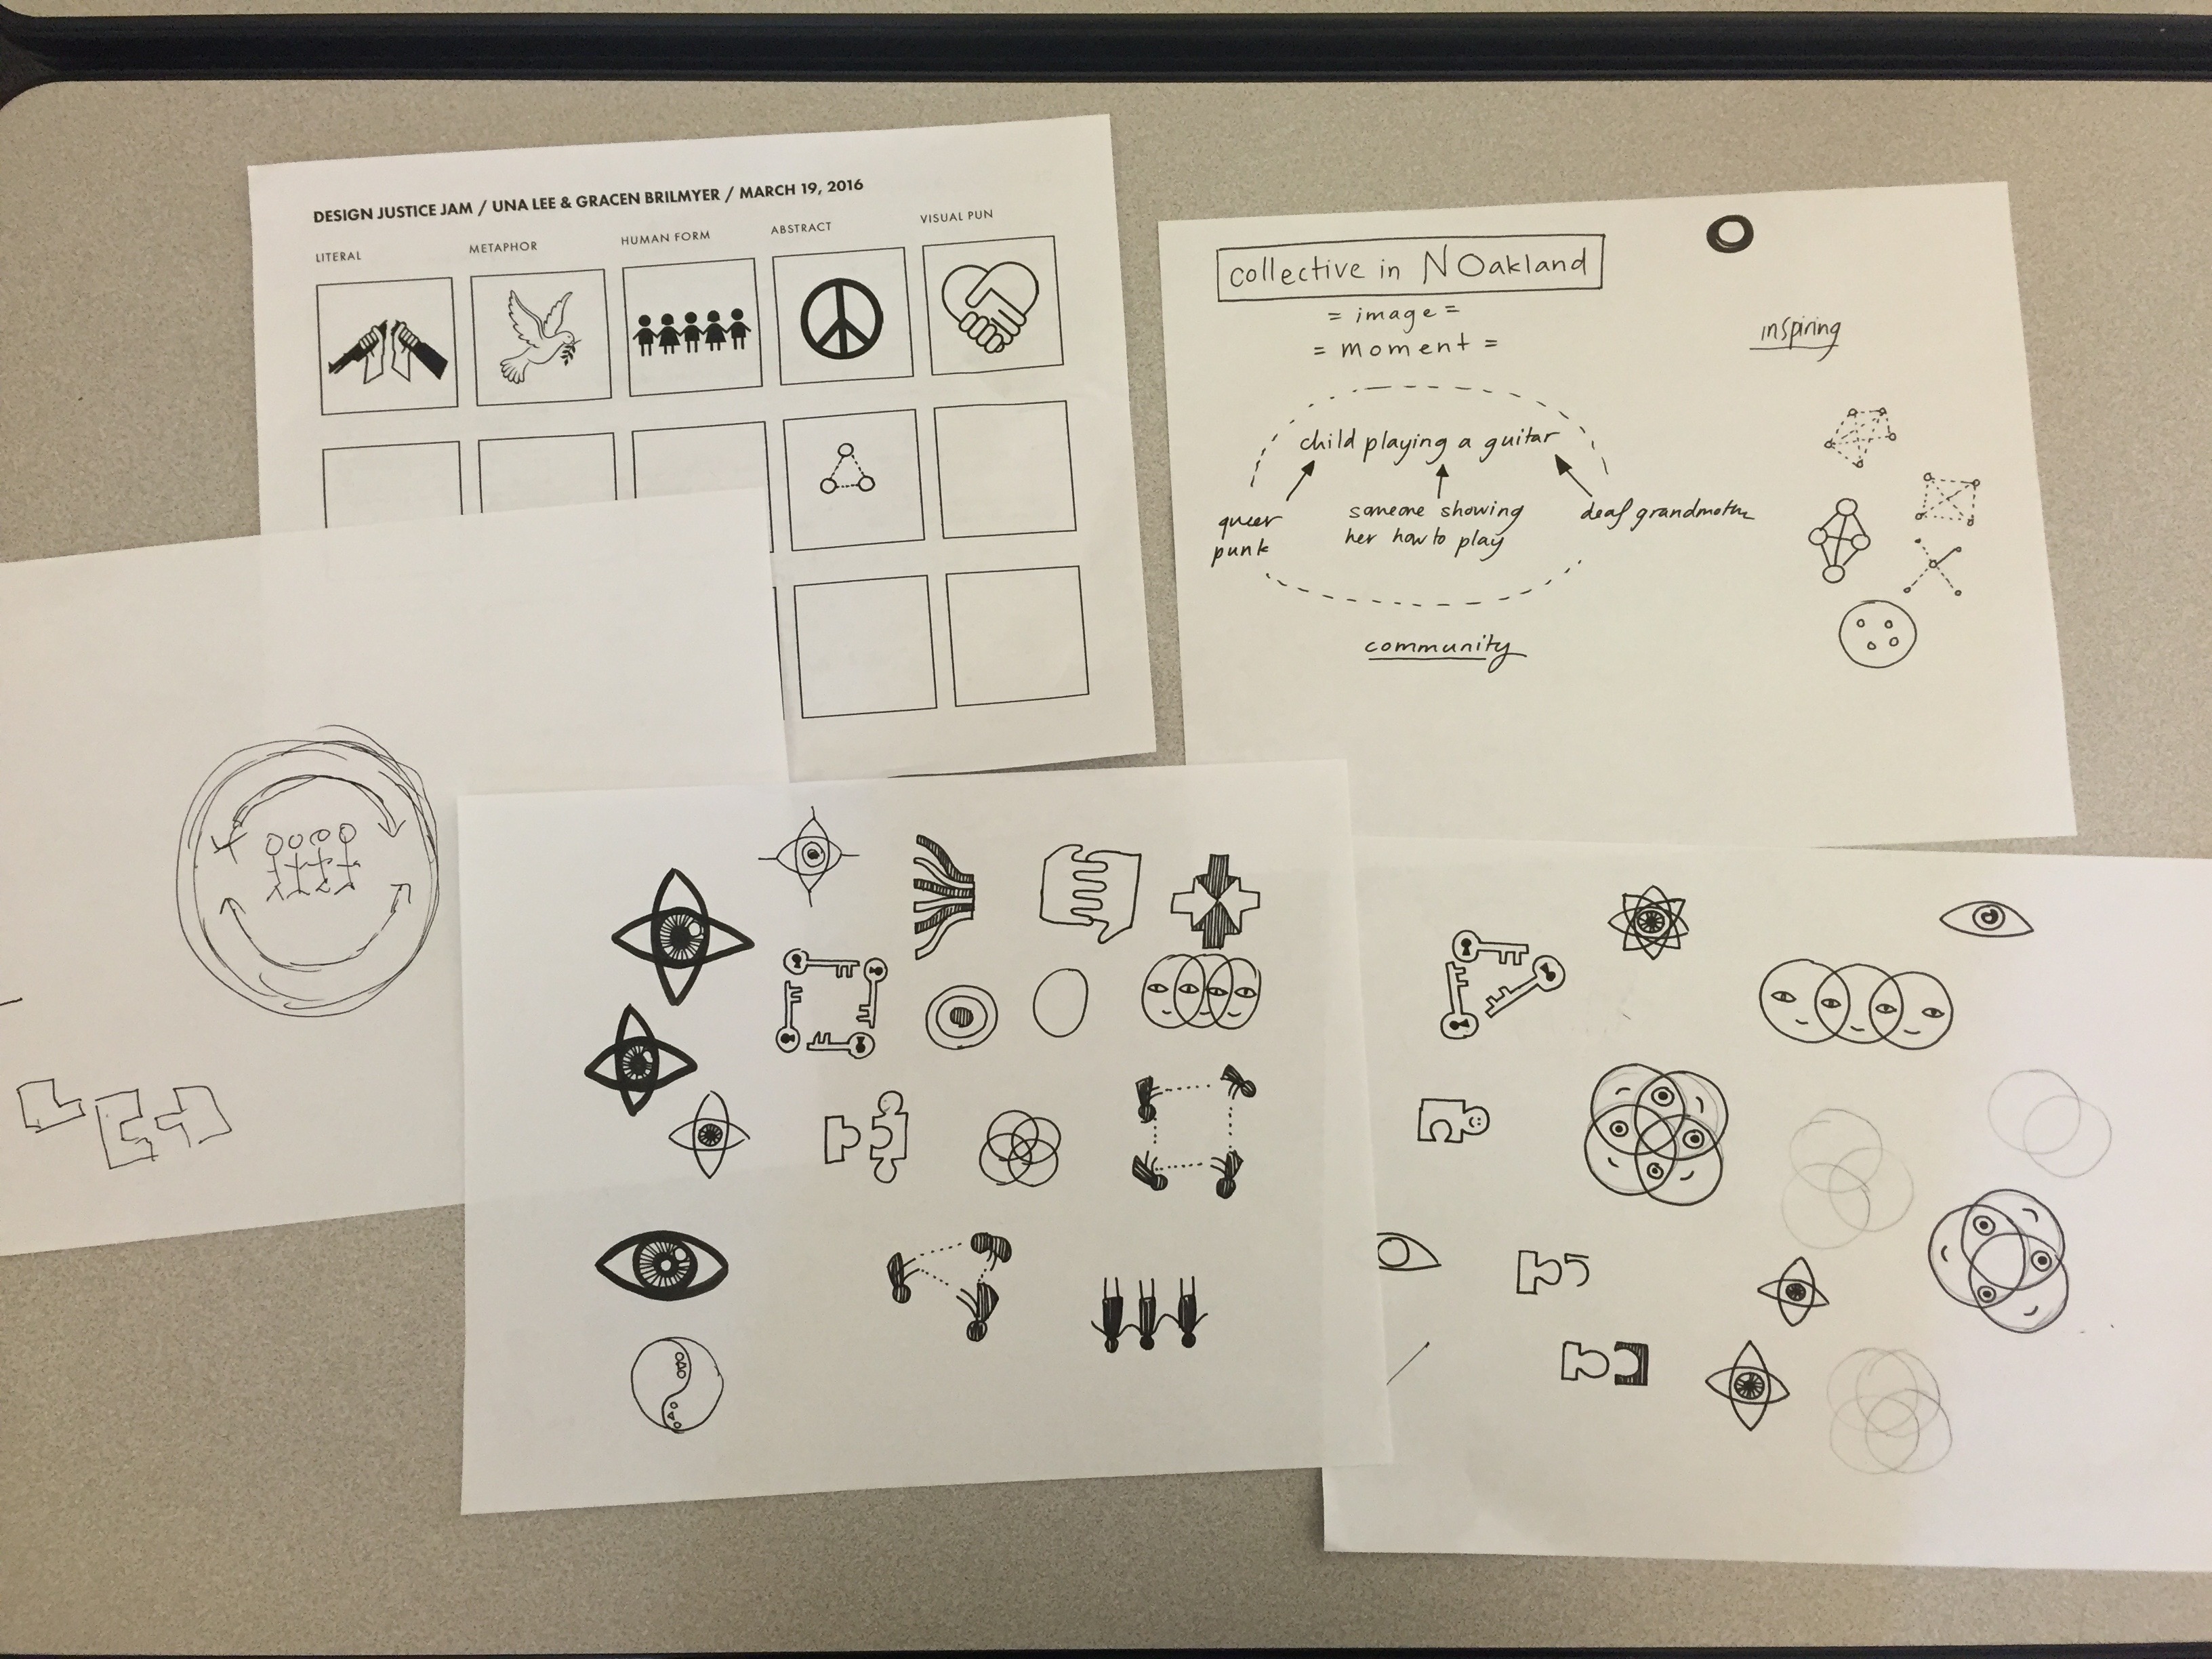 Photo: Five sheets of paper sitting on a table. One of the sheets is an exercise sheet to generate different types of icons. The other four are filled with pencil sketches and notes for new designs.